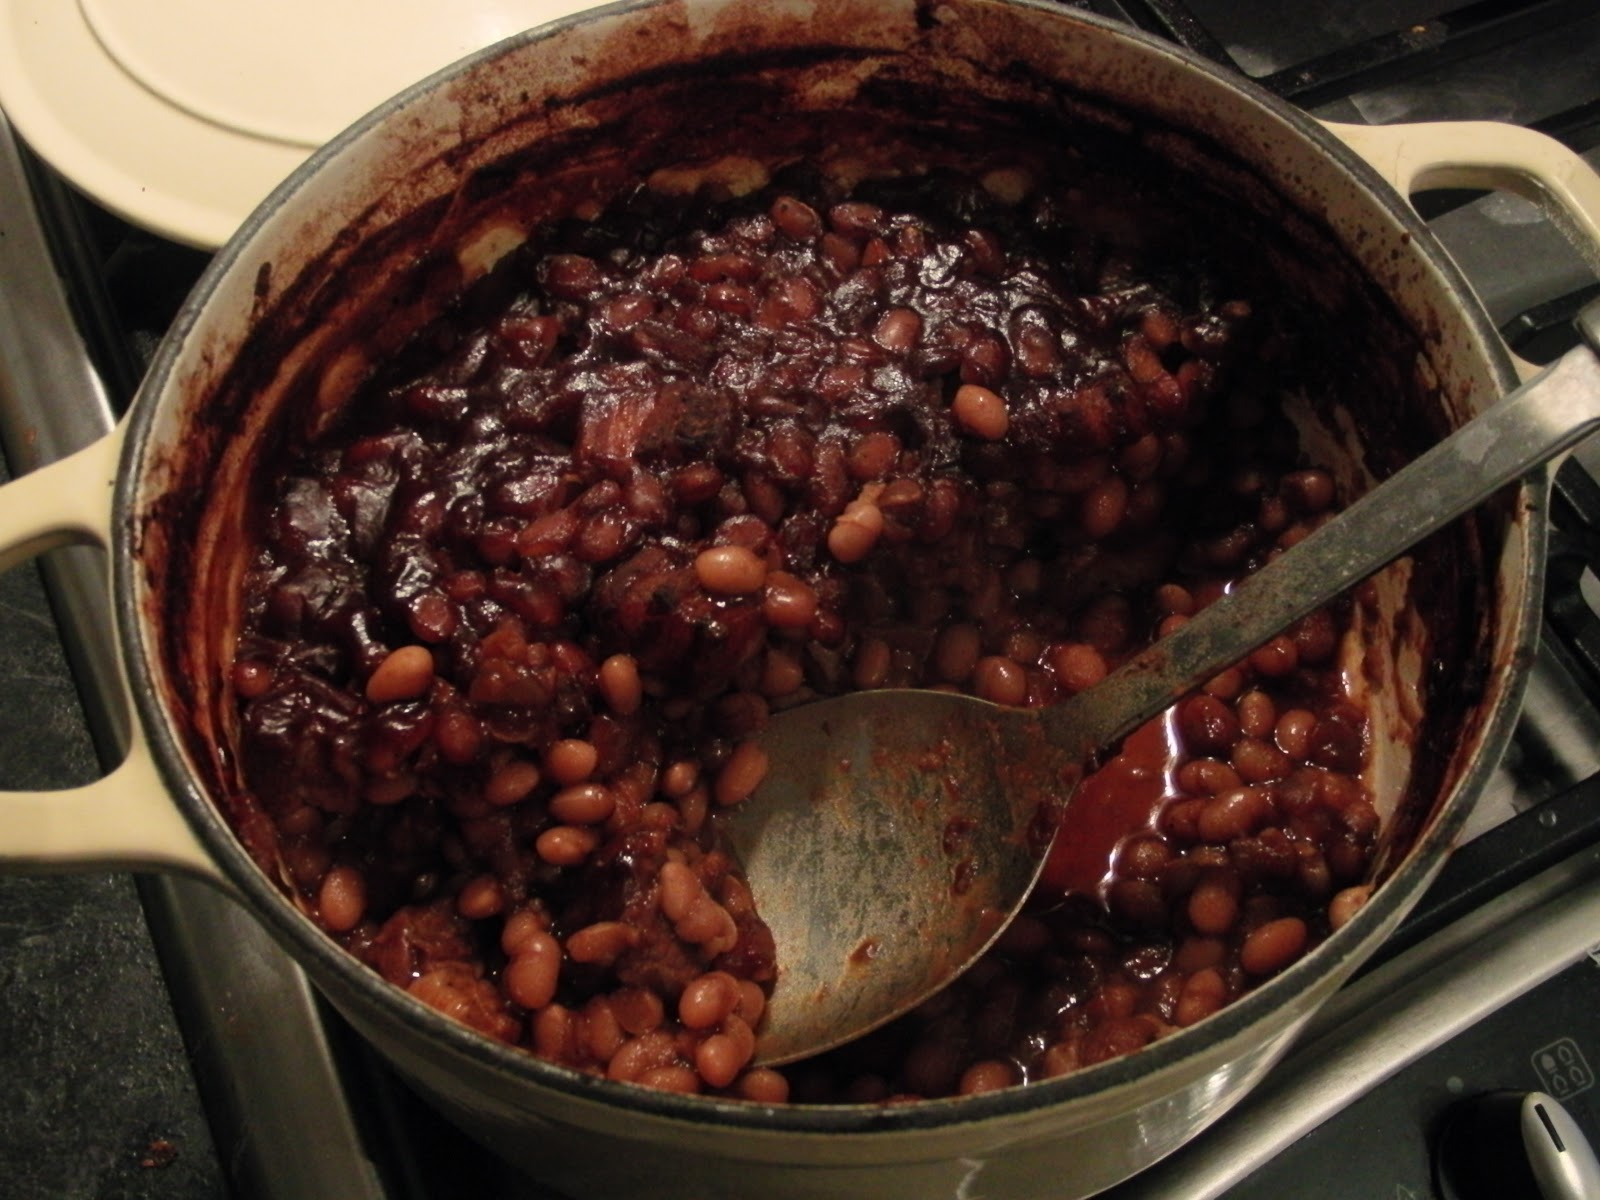 Burnt Ends Baked Beans Will Be Your GoTo Barbecue Side Dish!